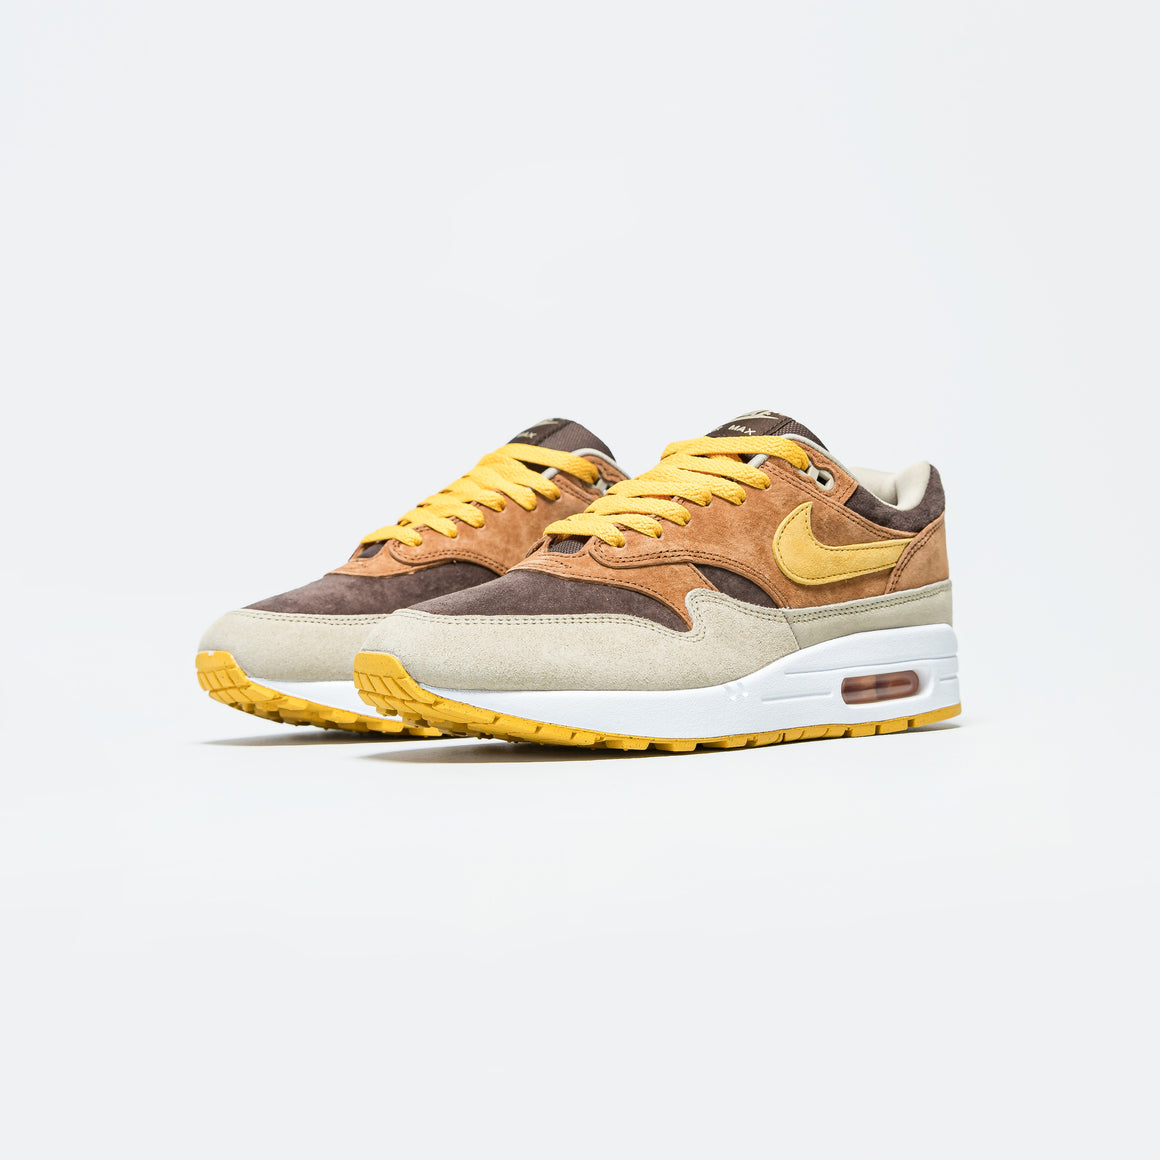 Nike - Air Max 1 PRM - Pecan/Yellow Ochre/Baroque Brown - UP THERE